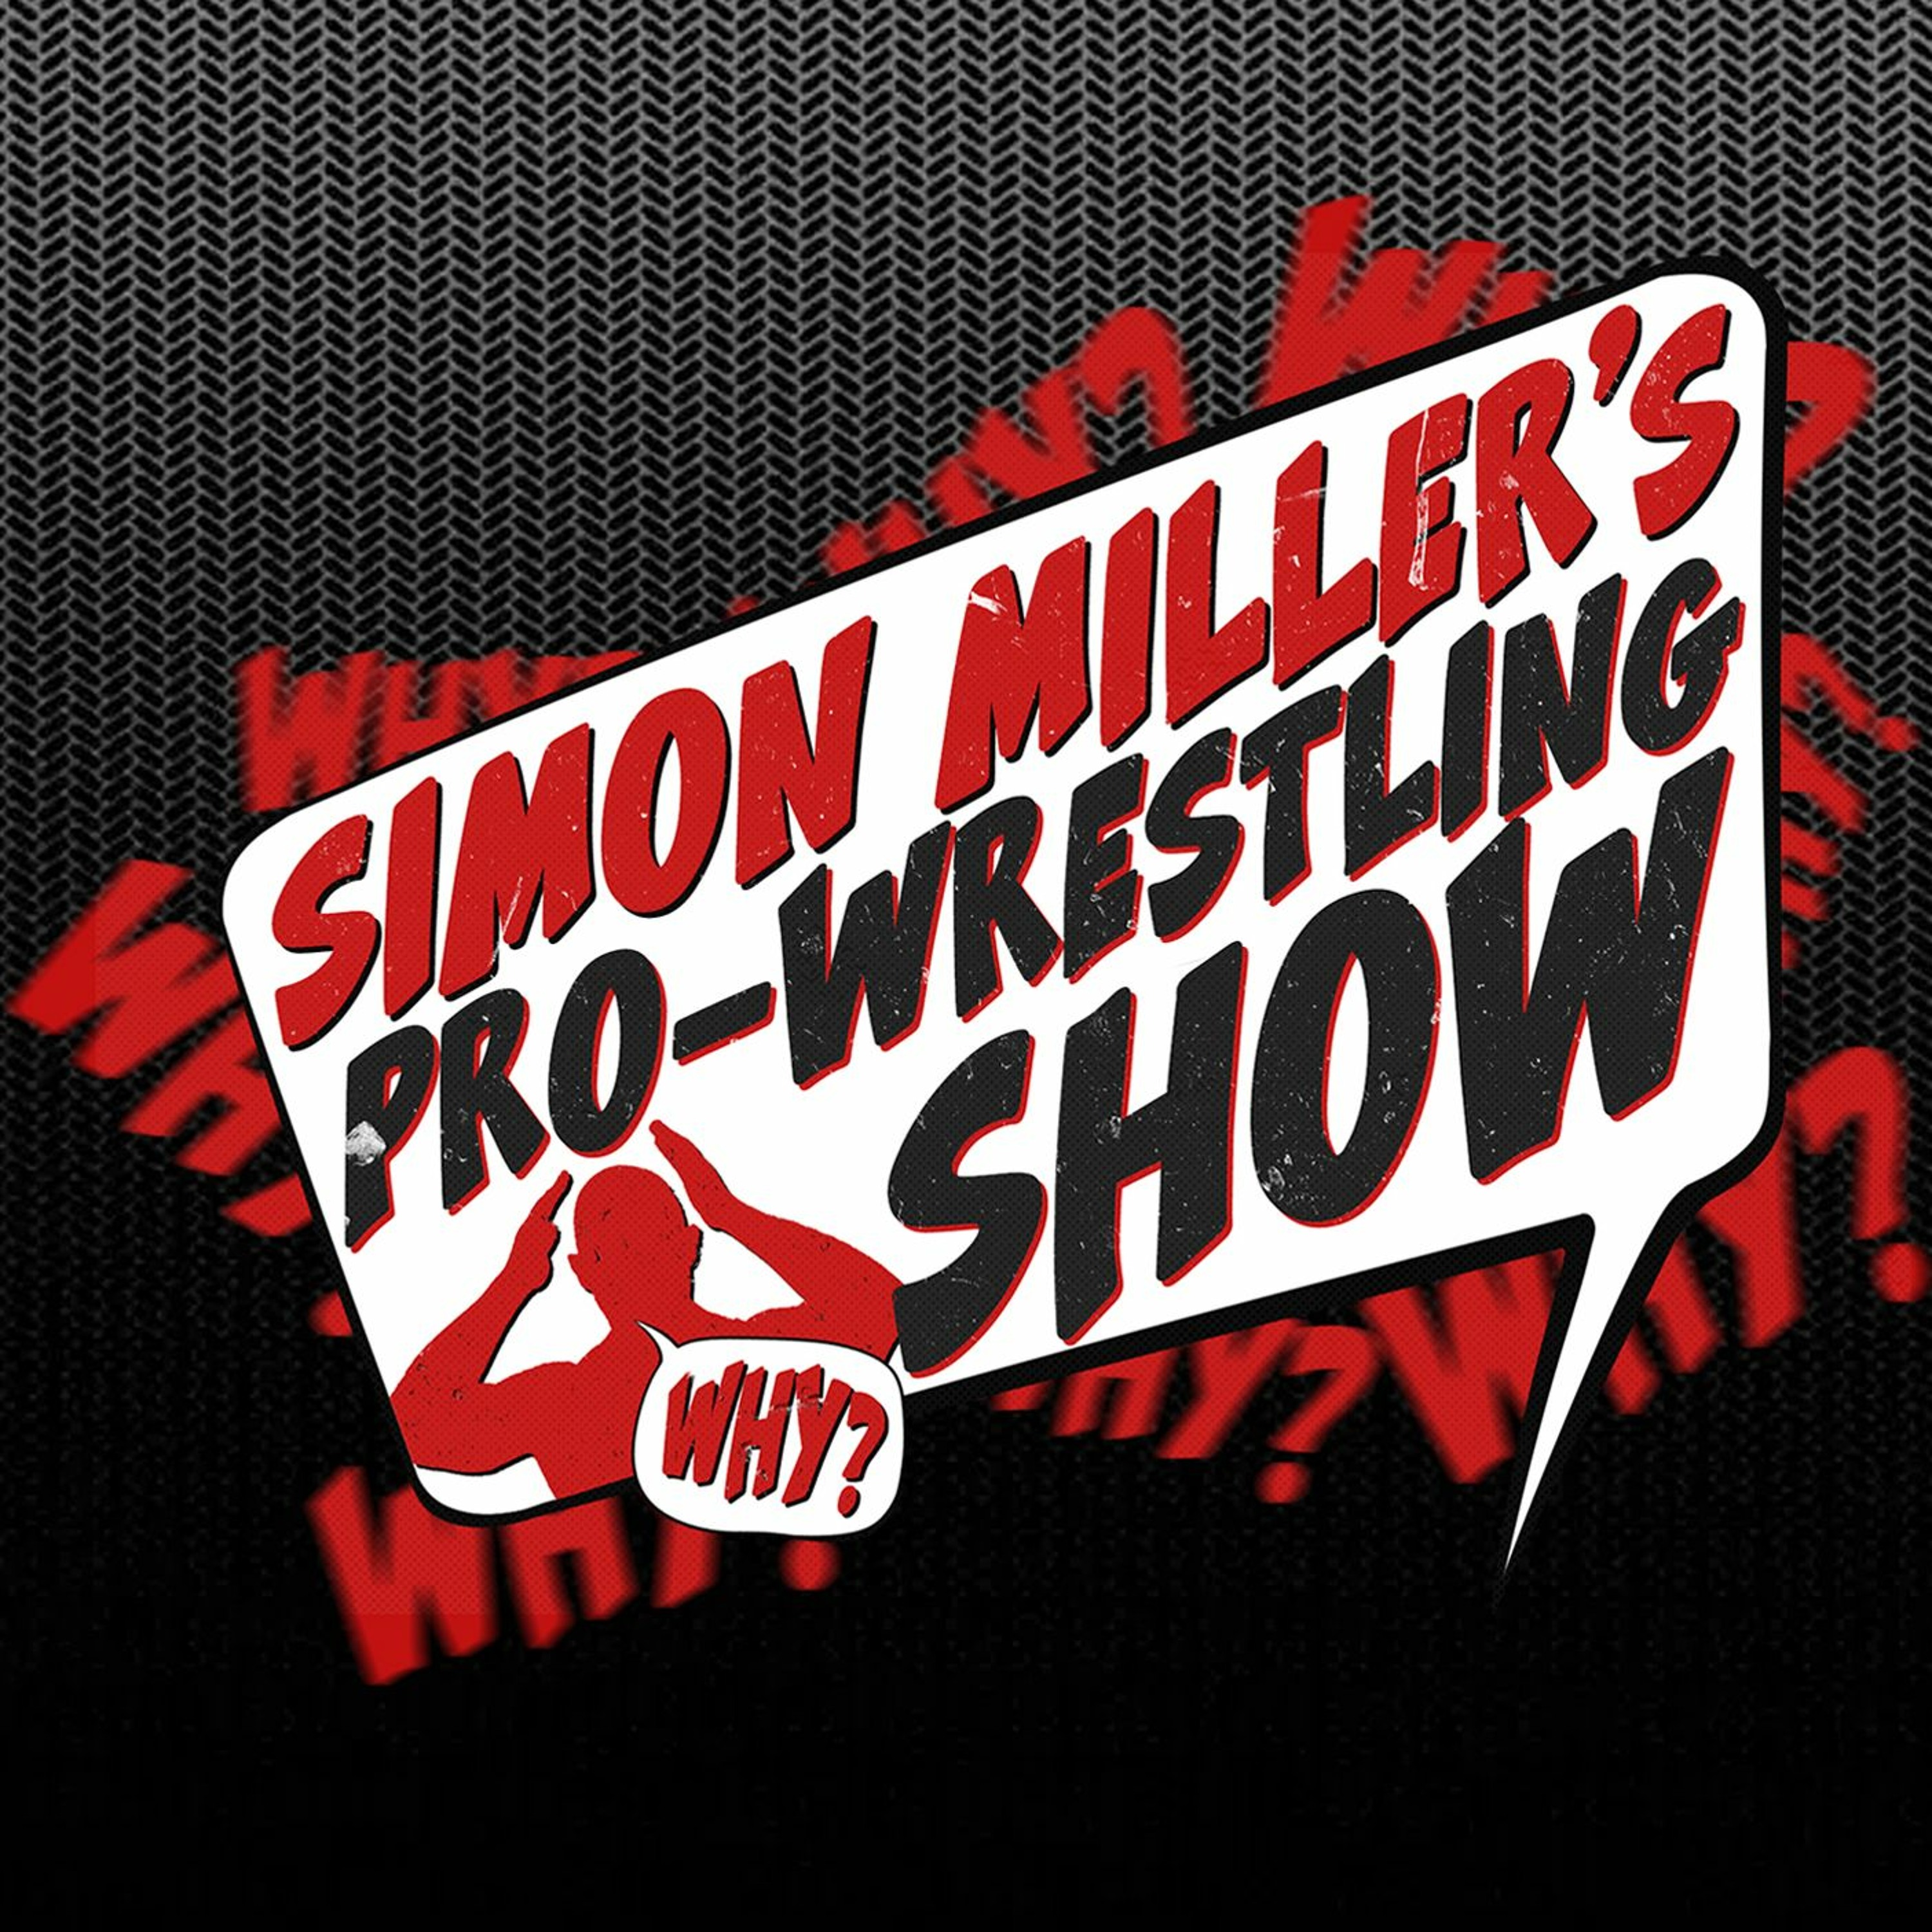 Eps 406 - CM Punk Changes Wrestling For The 46th Time